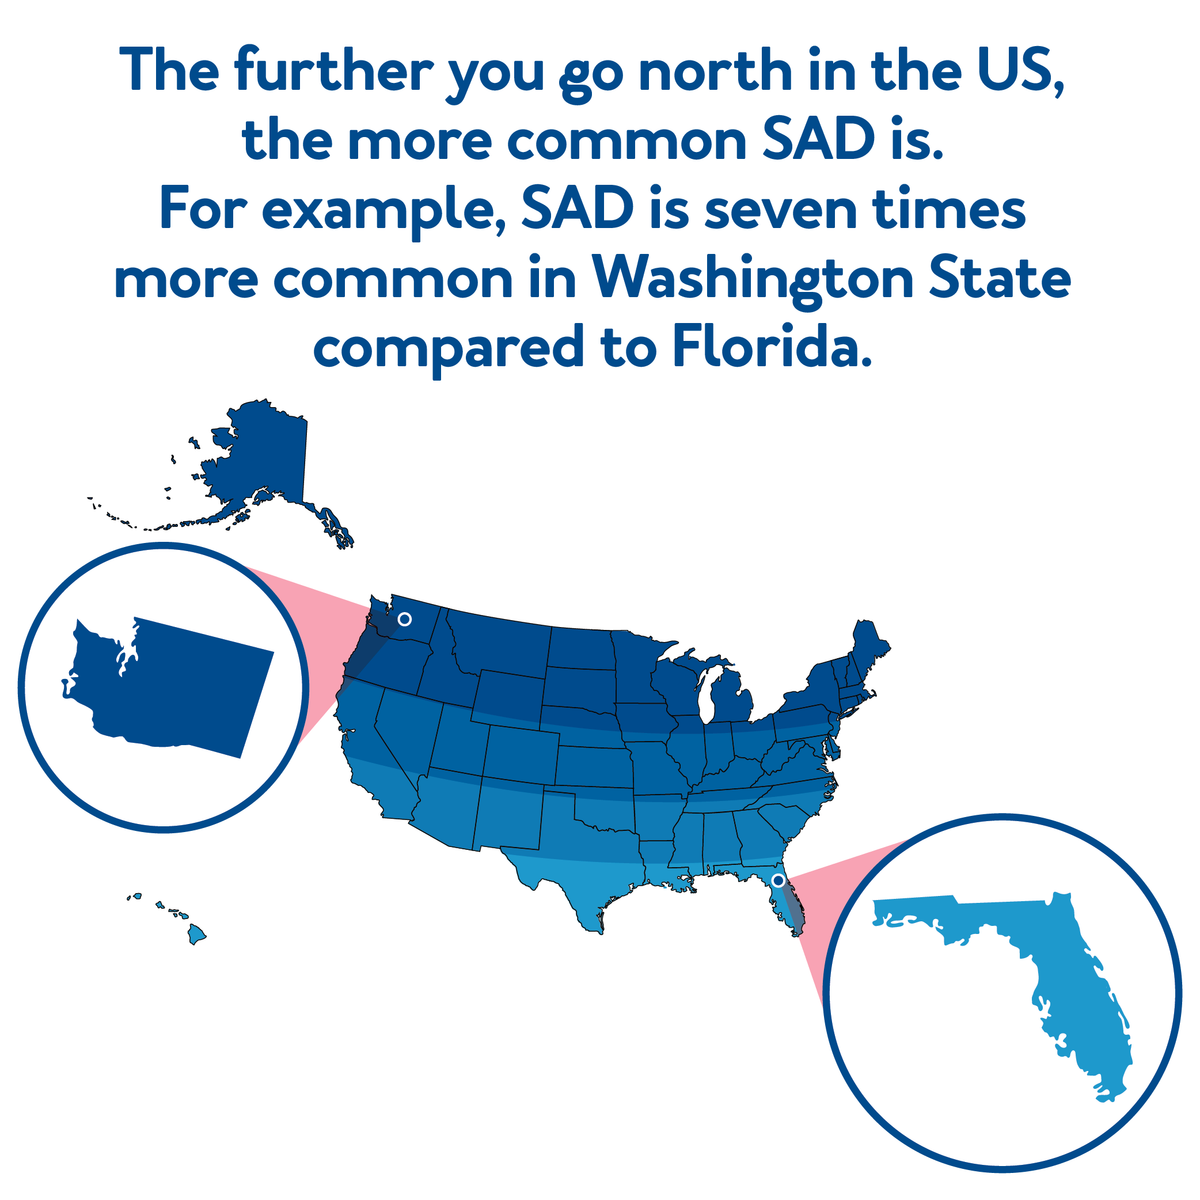 The further you go north in the U.S., the more common SAD is : Further details are provided below